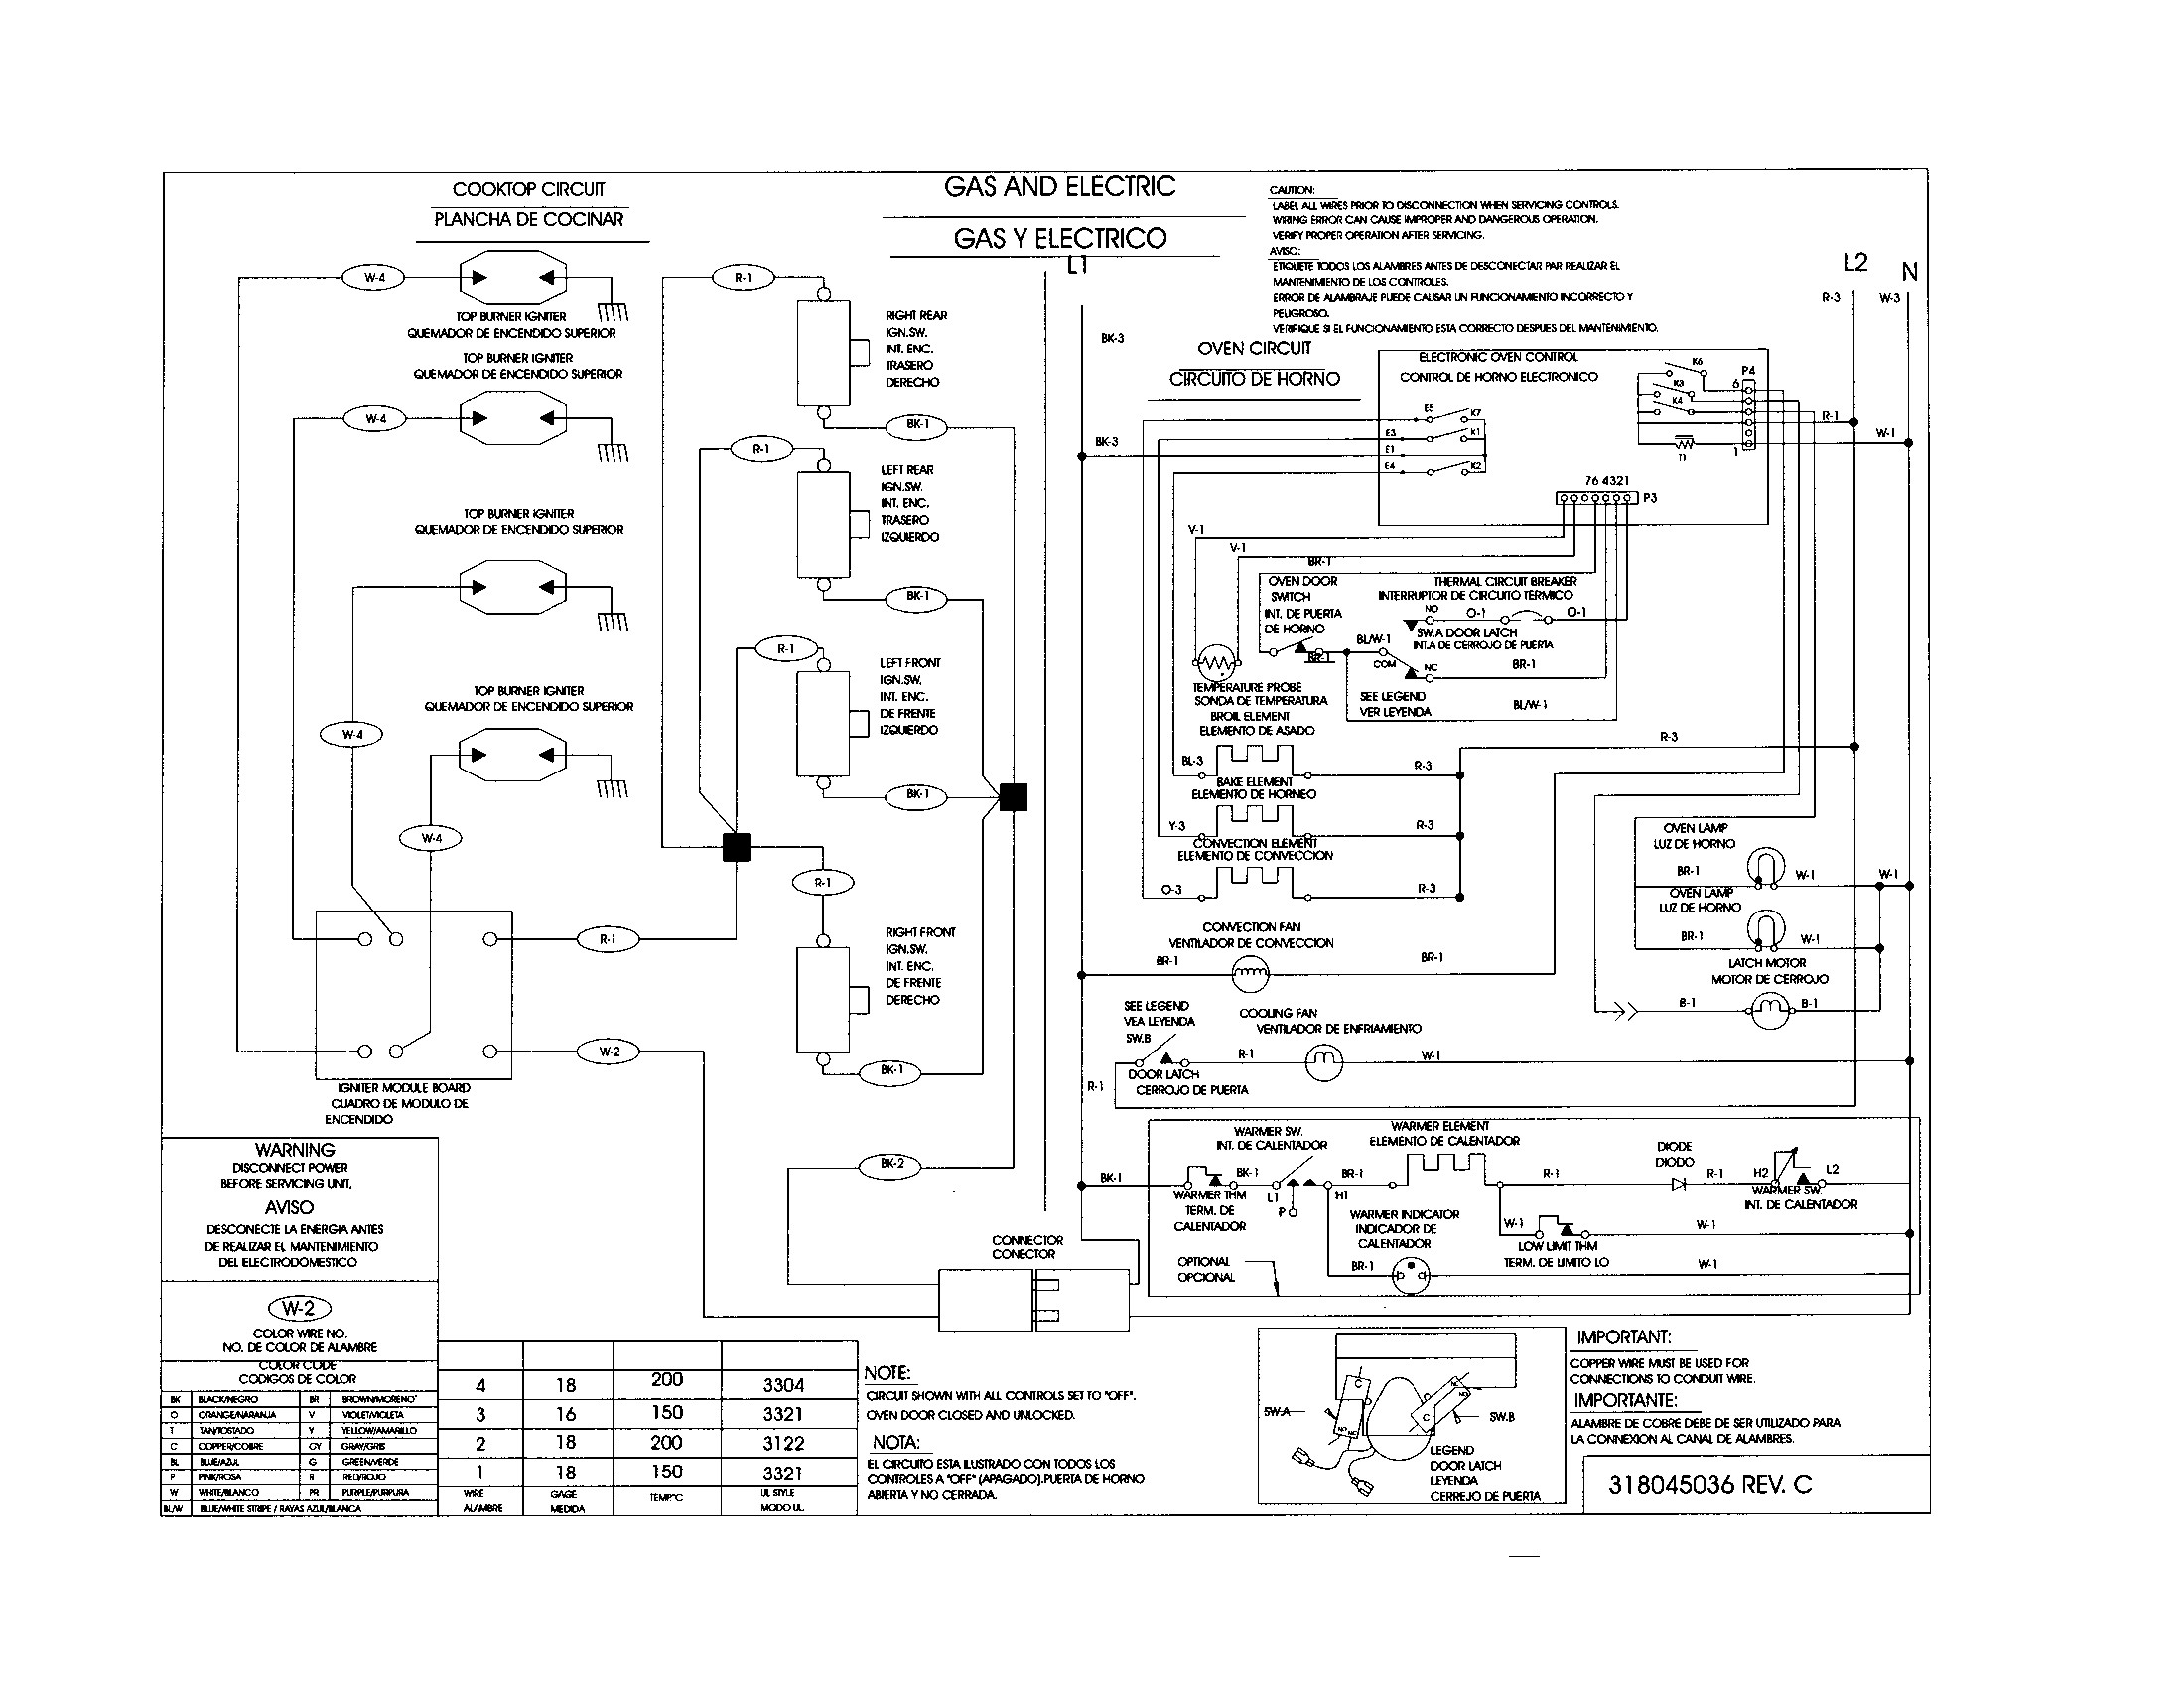 kenmore electric range wiring diagram Download-Impeccable Kenmore Electric Dryer Timer Stove Clocks Wiring Throughout Diagram 6 13-i